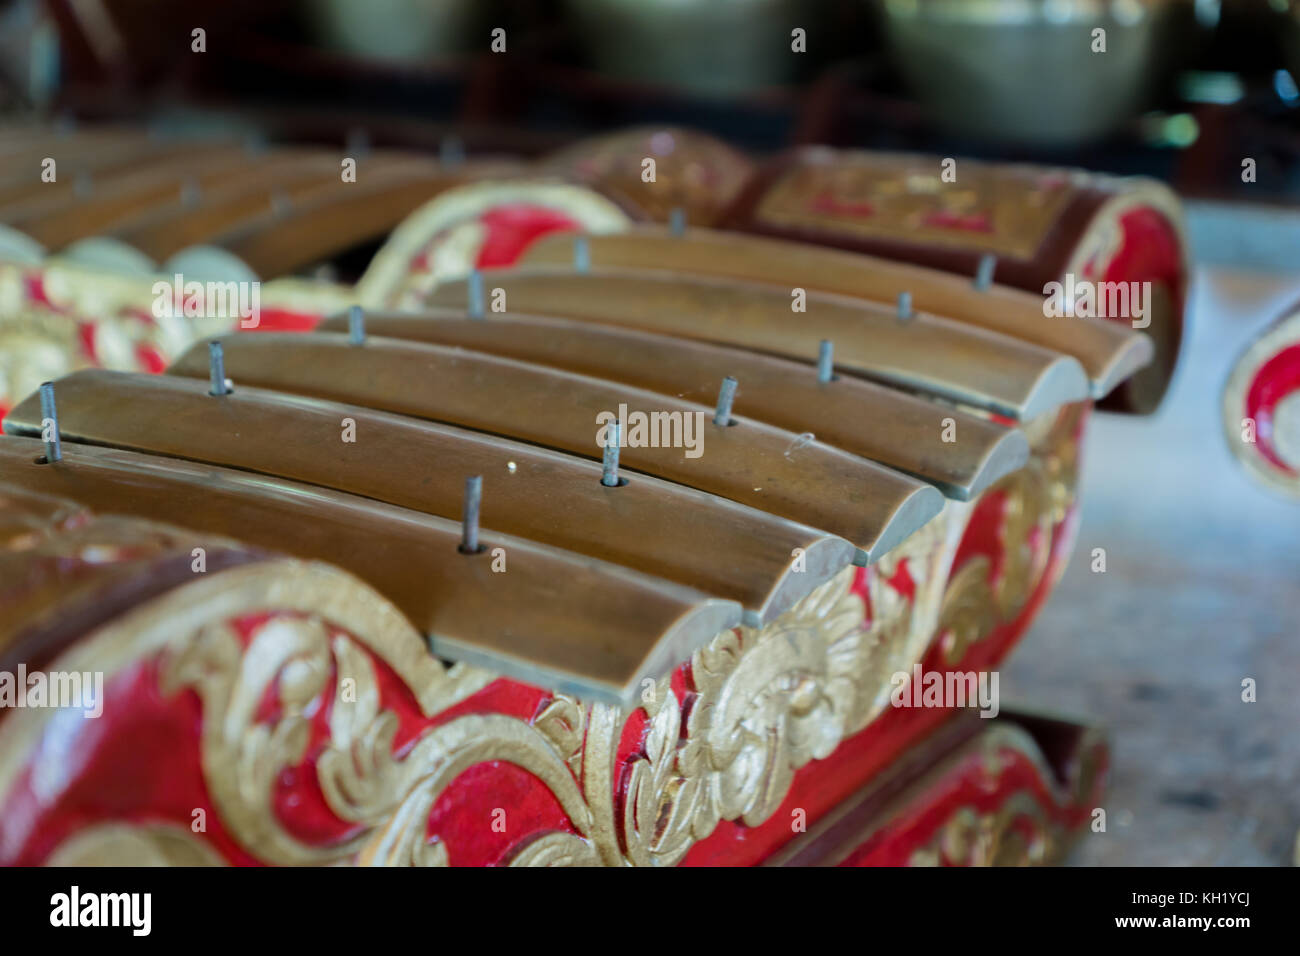 Saron, a gamelan music instrument, a traditional music in Bali and Java, Indonesia Stock Photo